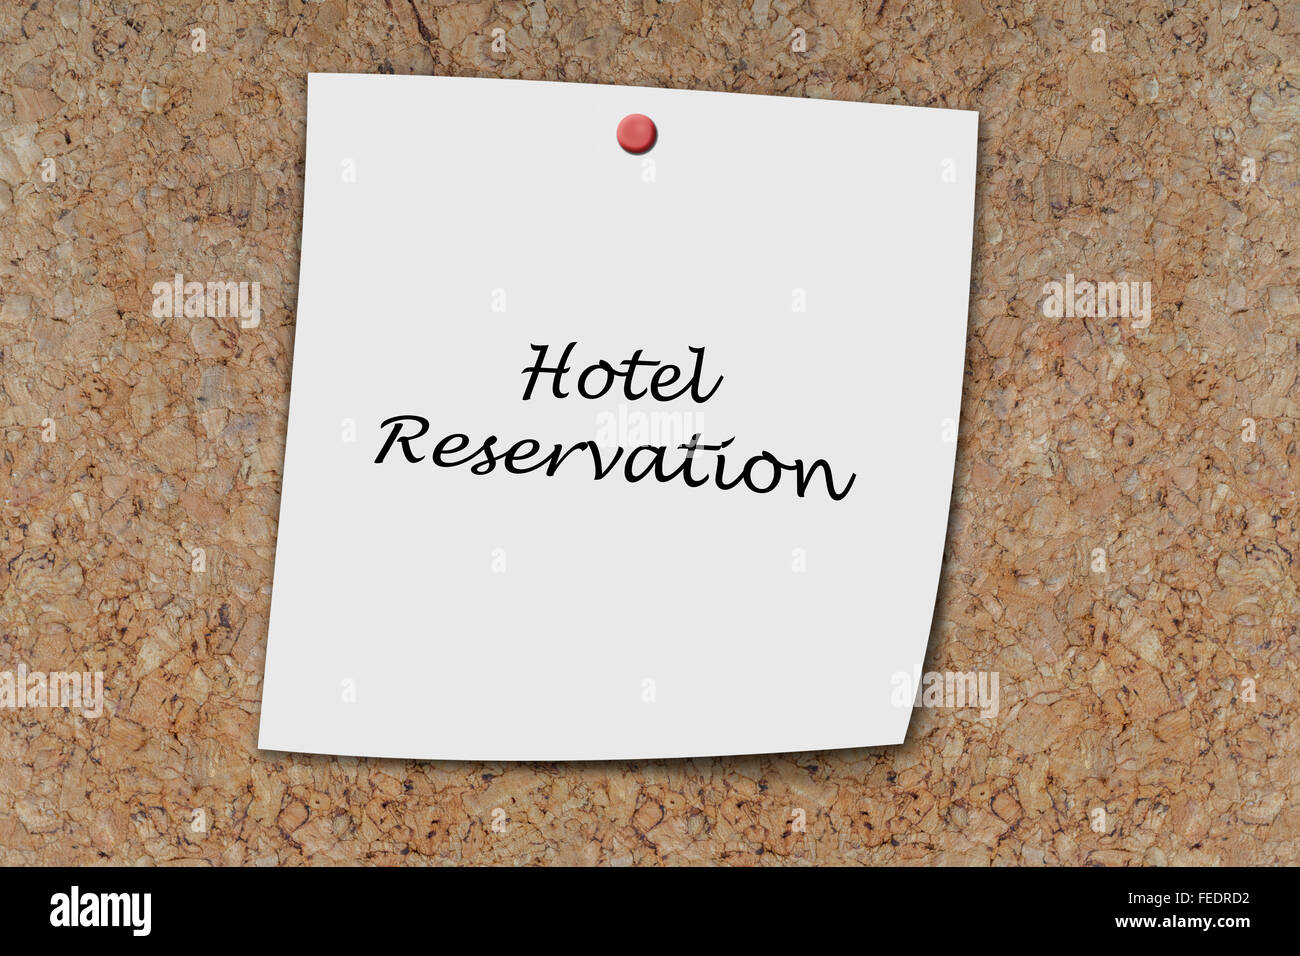 make a hotel reservation written on a memo pinned on a cork board Stock Photo